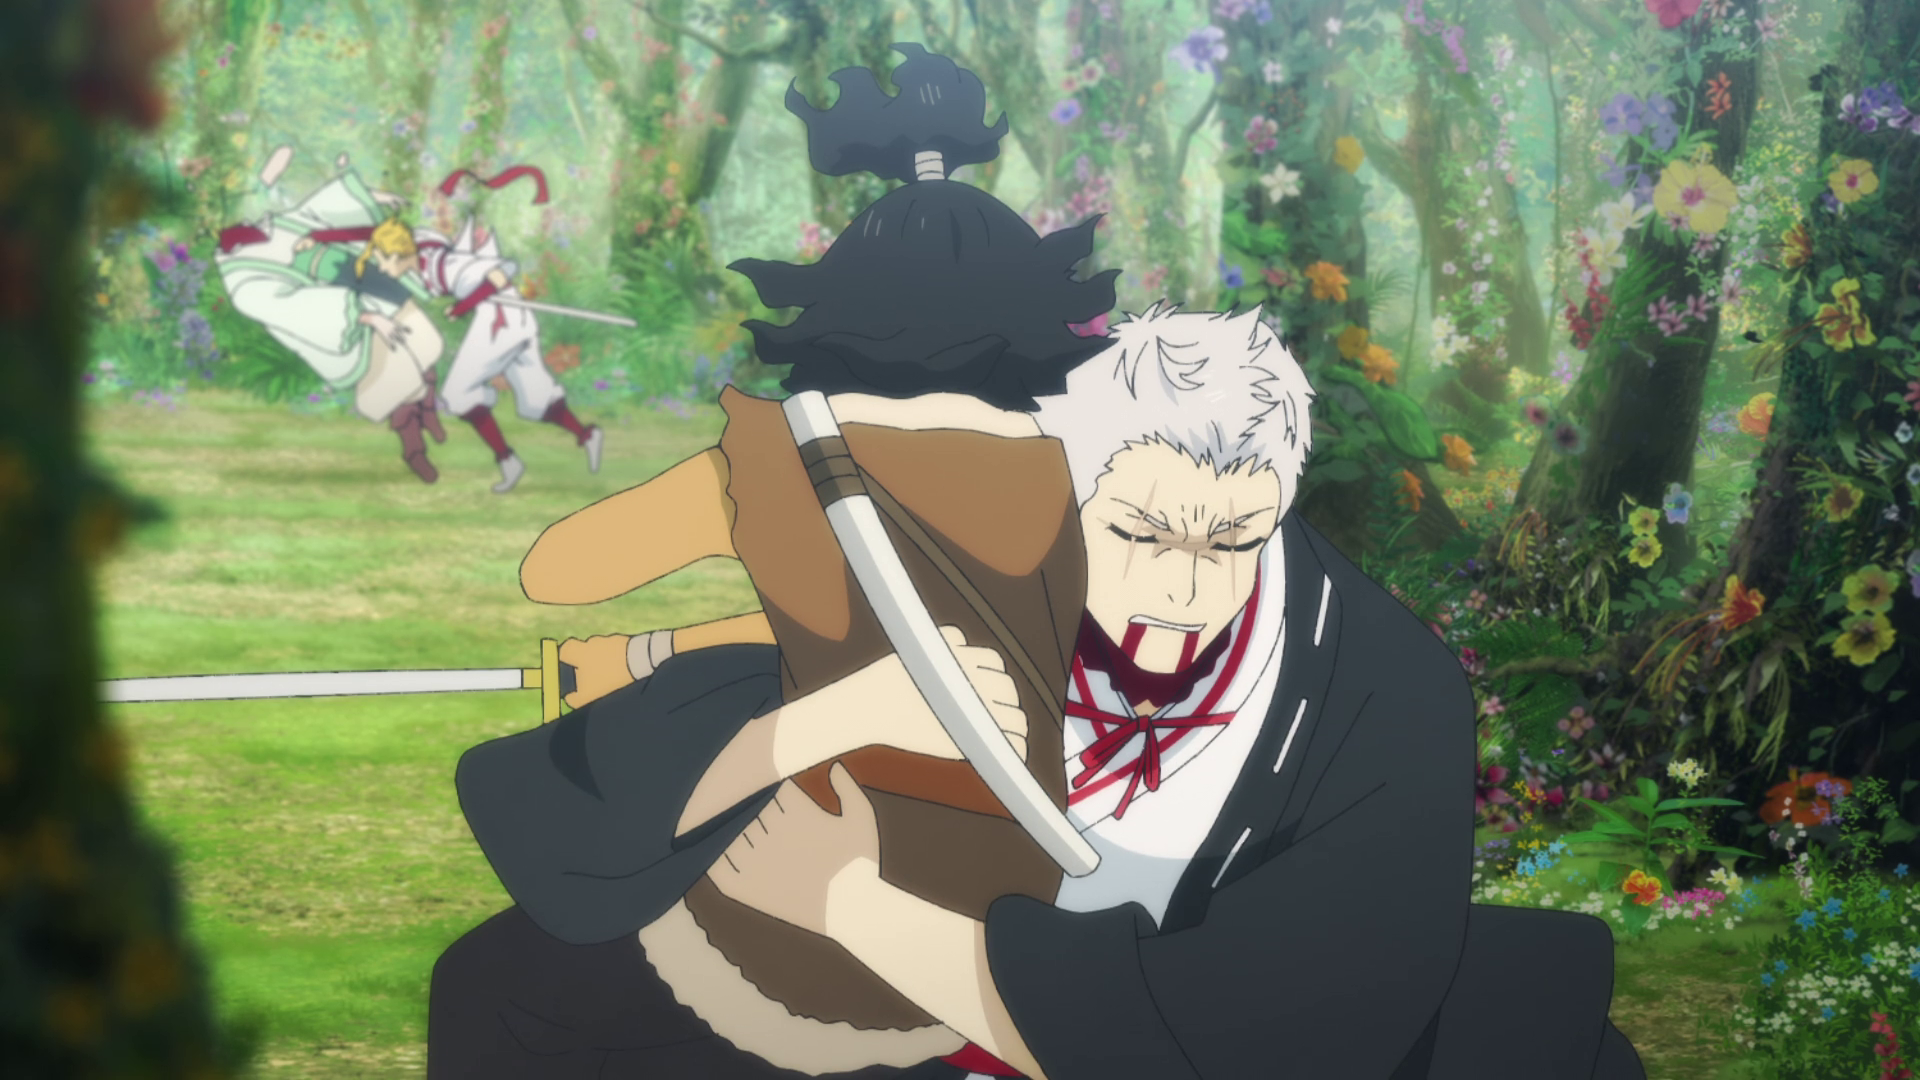 Hell's Paradise episode 13: Shion vs Mu Dan comes to an end as